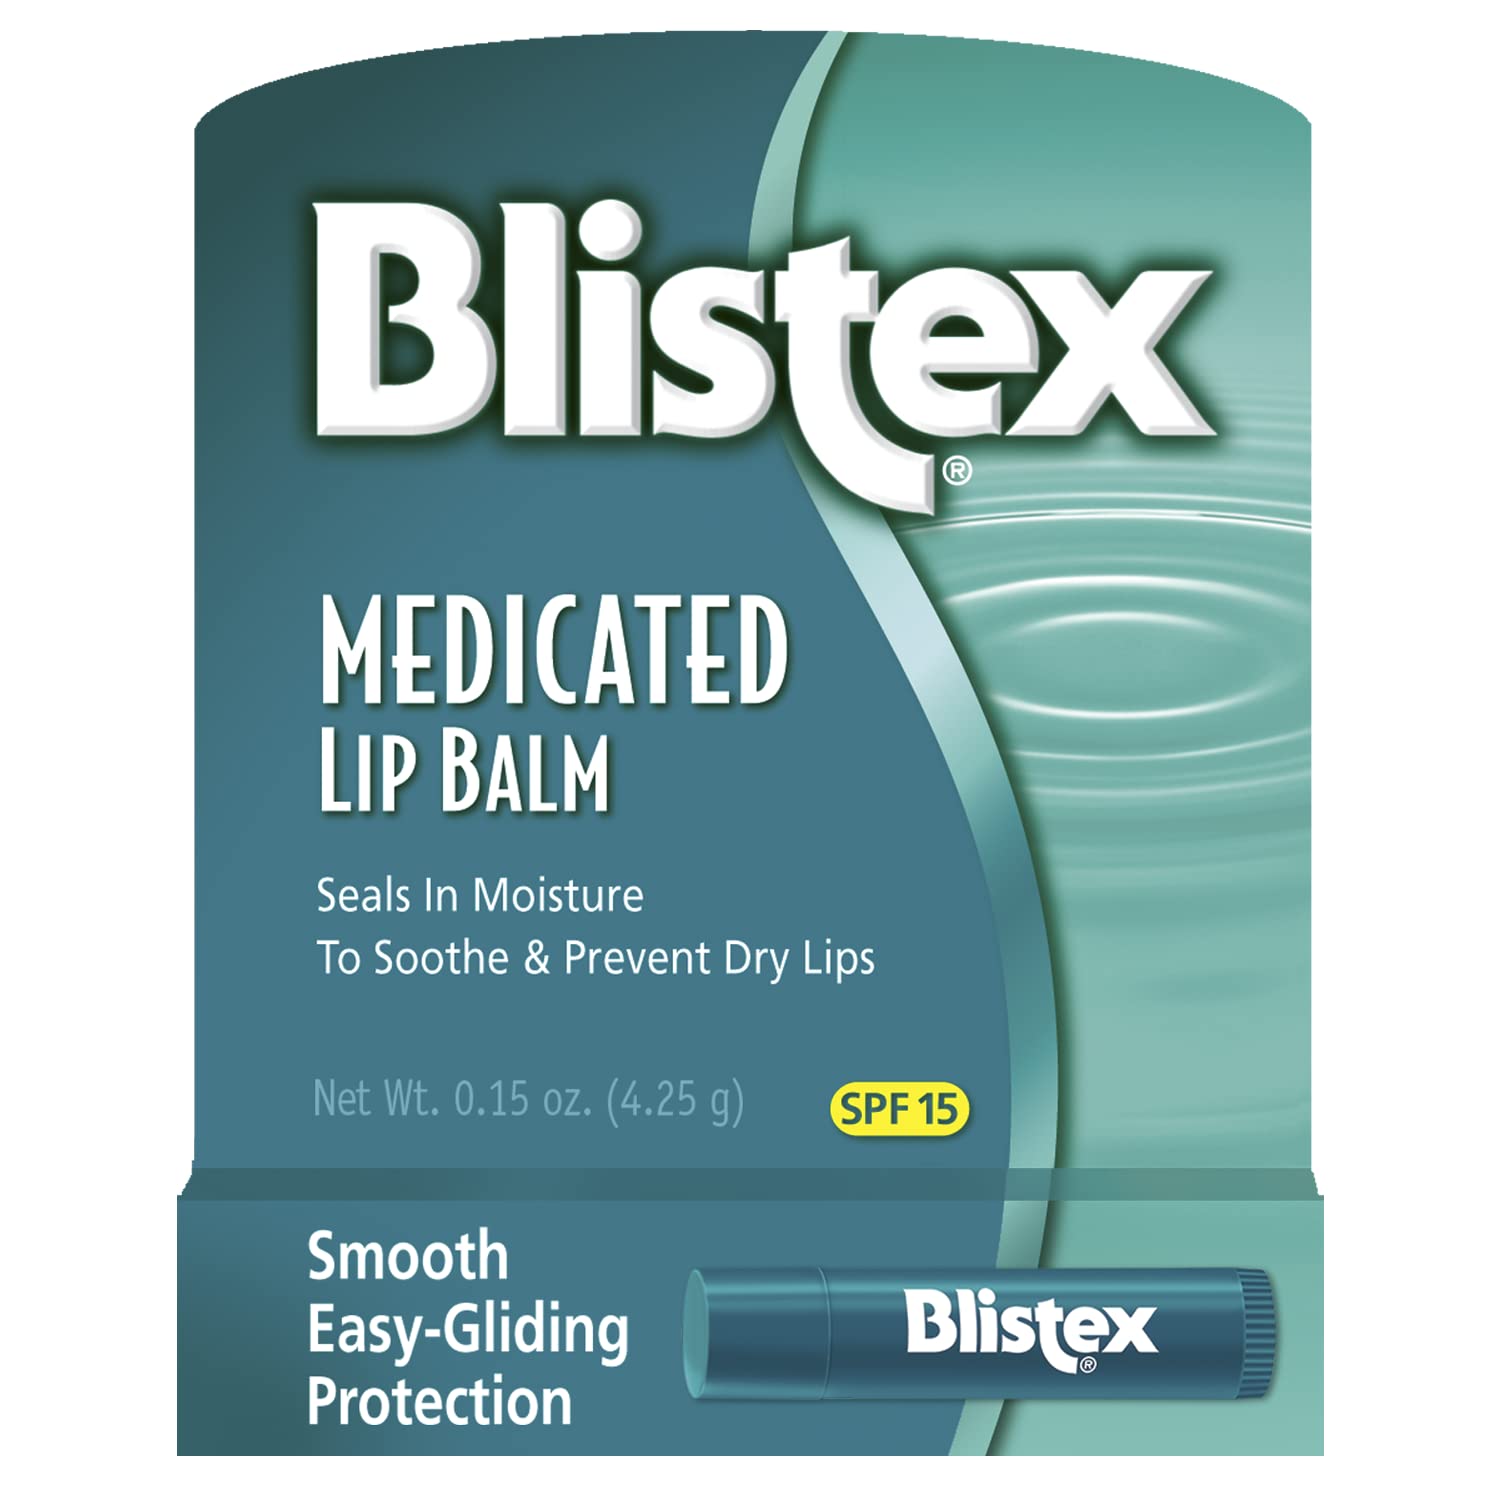 24-Pack 0.15oz Blistex SPF 15 Medicated Lip Balm $10.11 w/ S&S & More + Free S&H w/ Prime